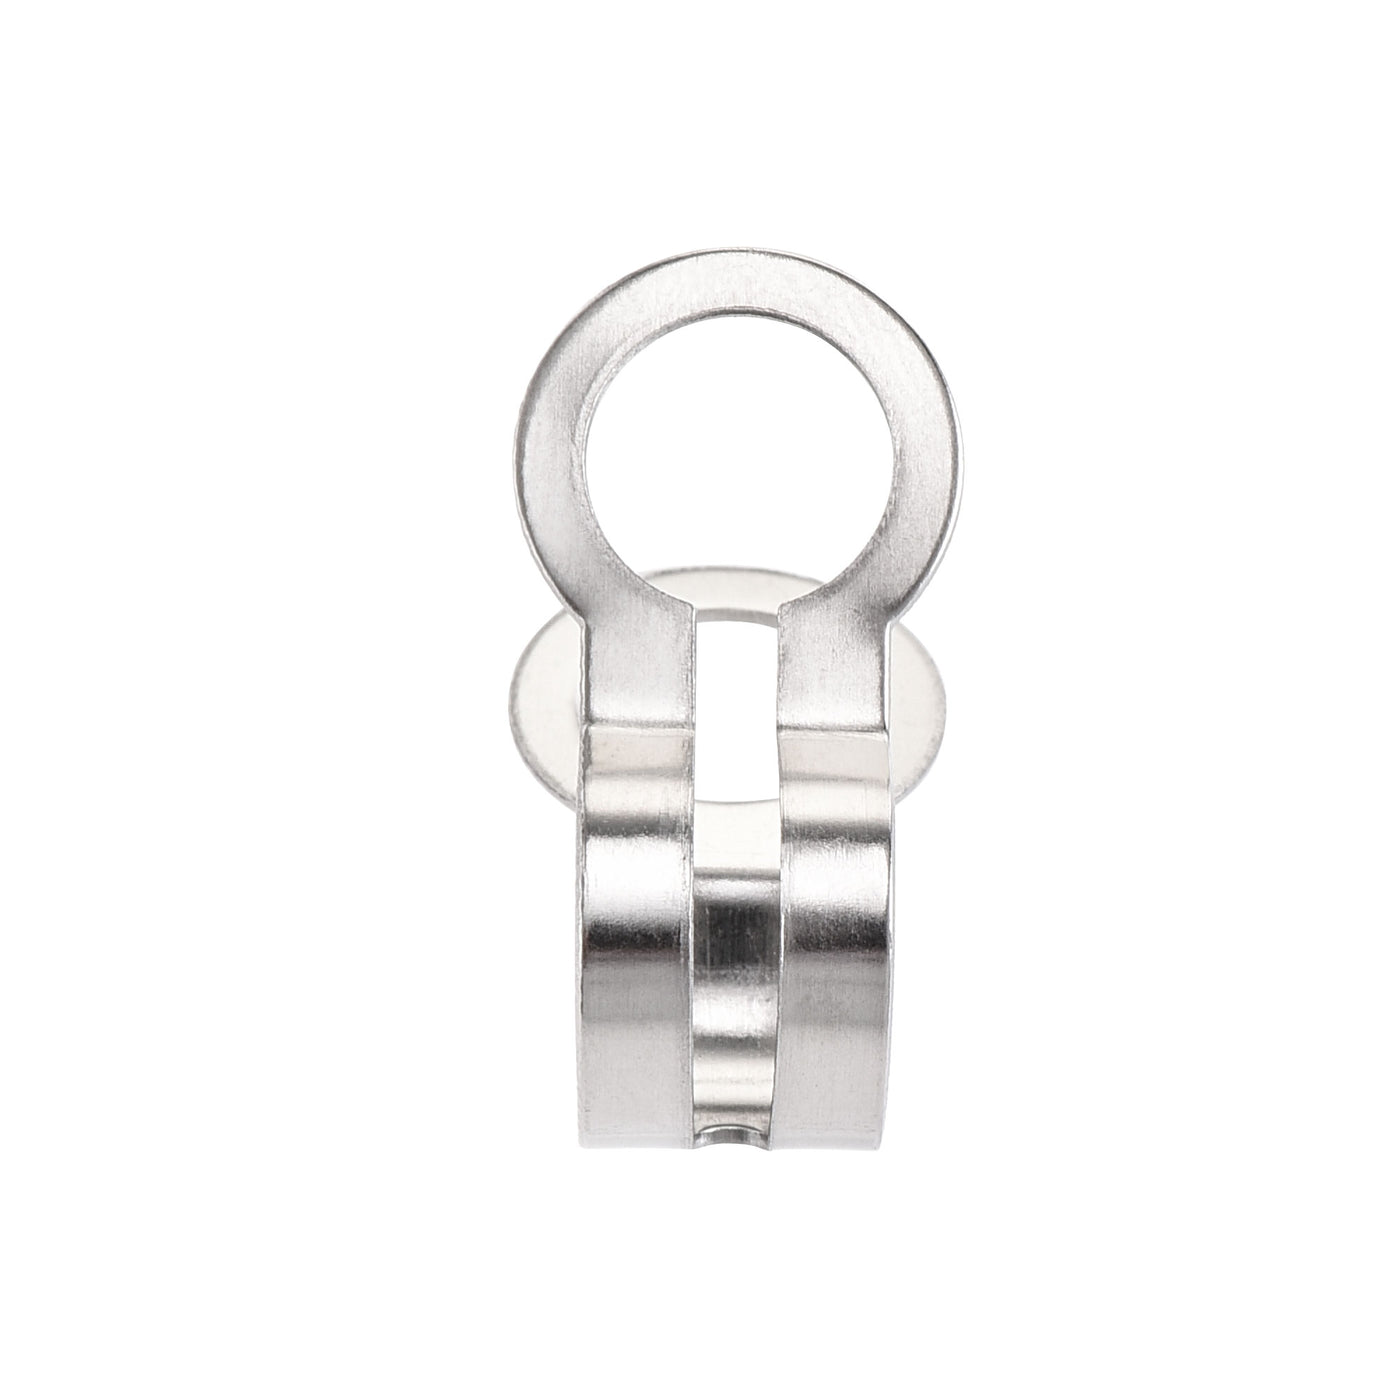 Uxcell Uxcell Ball Chain Connector, 5mm Double Ring Style Link Stainless Steel Loop Connection, Pack of 20